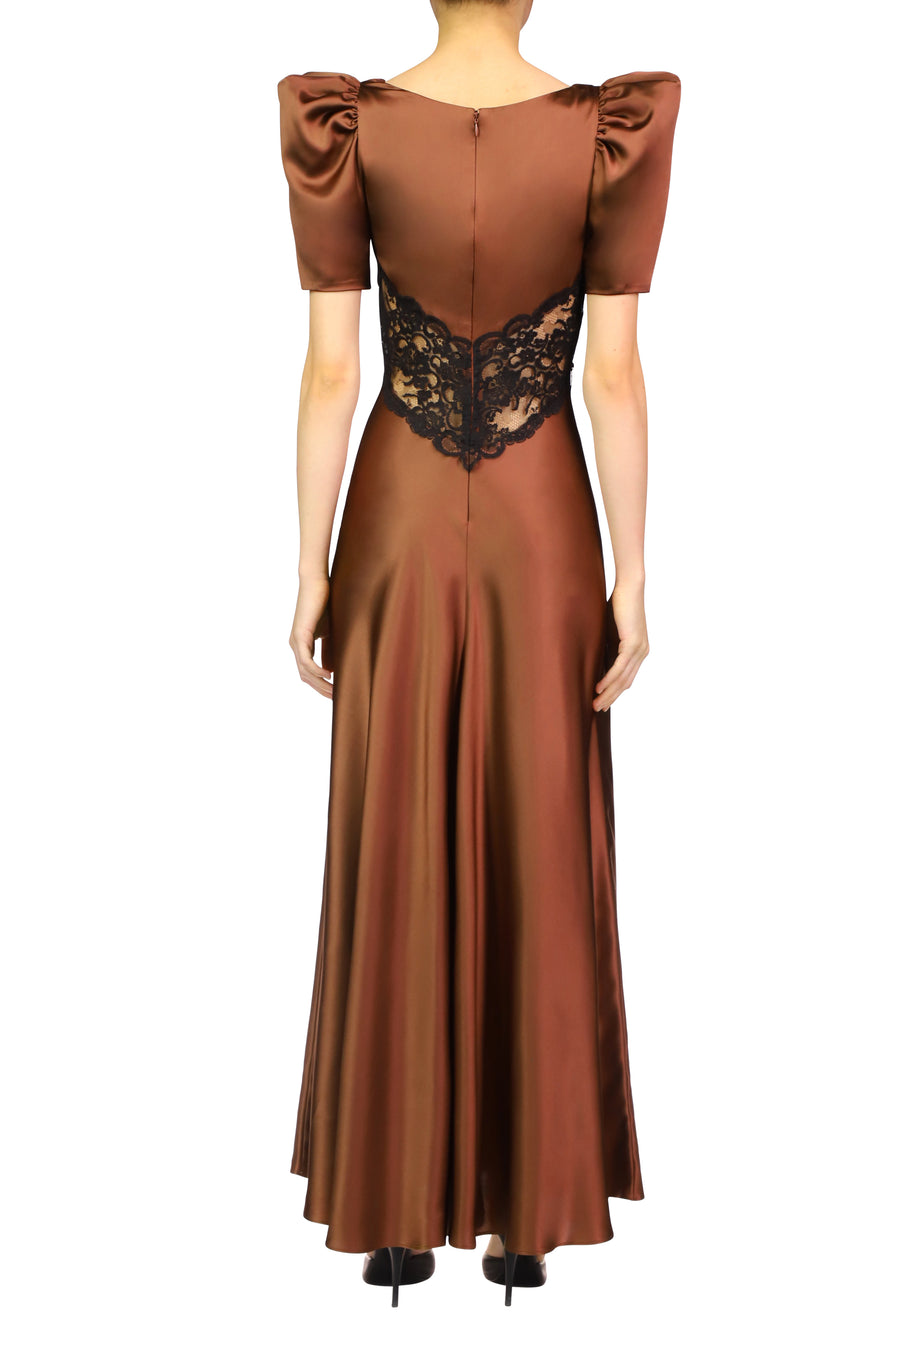 Brown Silk Satin Short Sleeve Dress With Black Lace Details